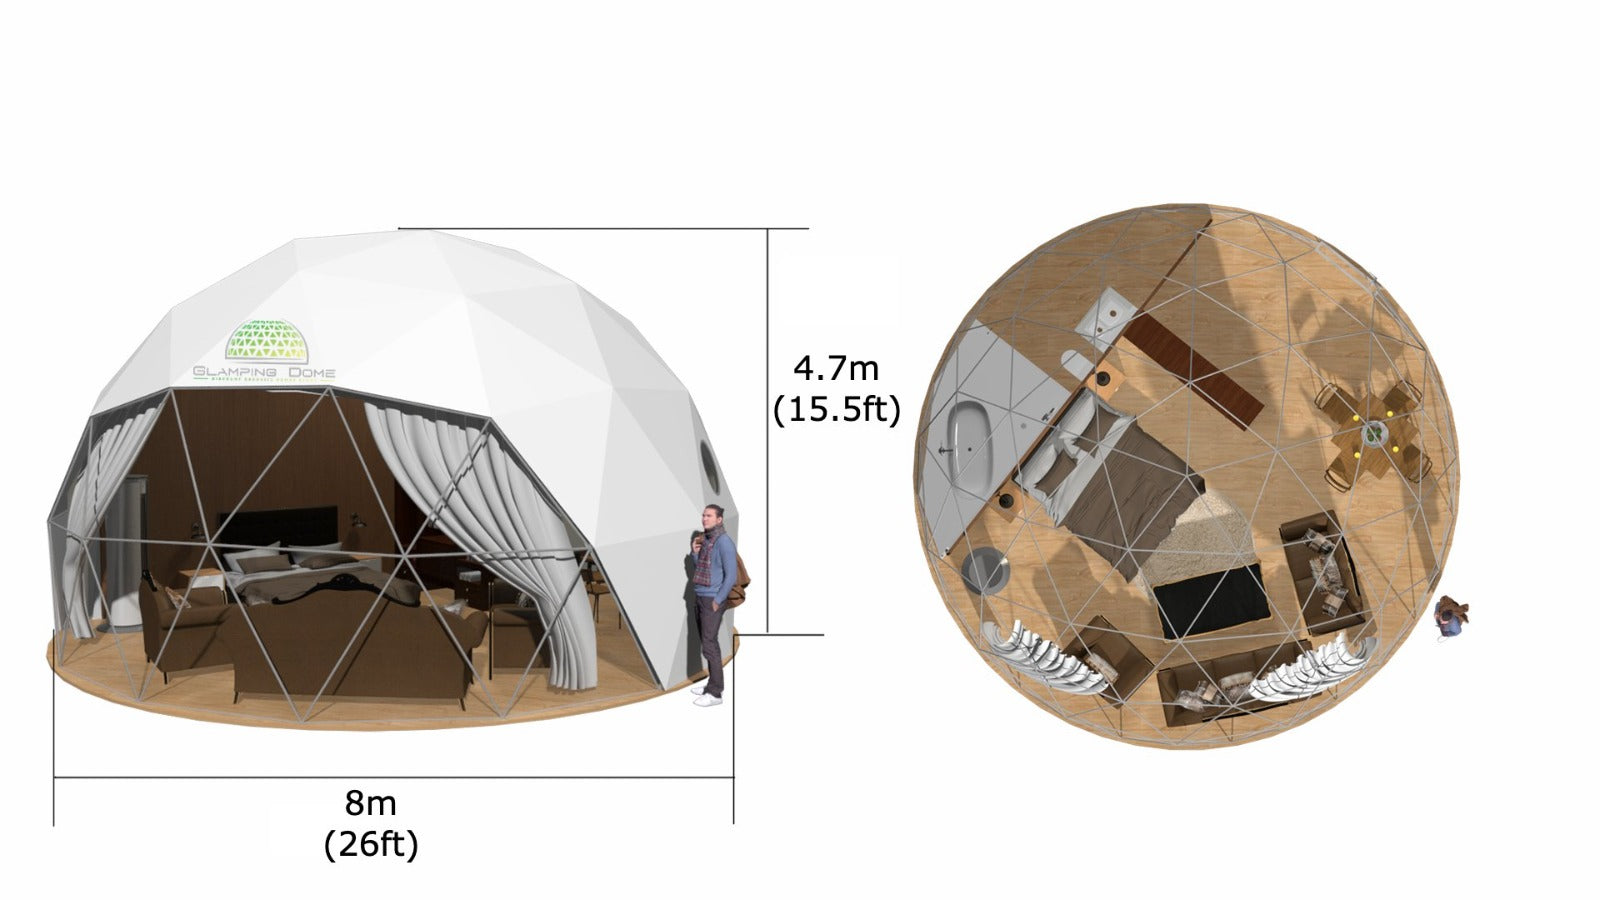 26ft 8m geodesic dome glamping tent